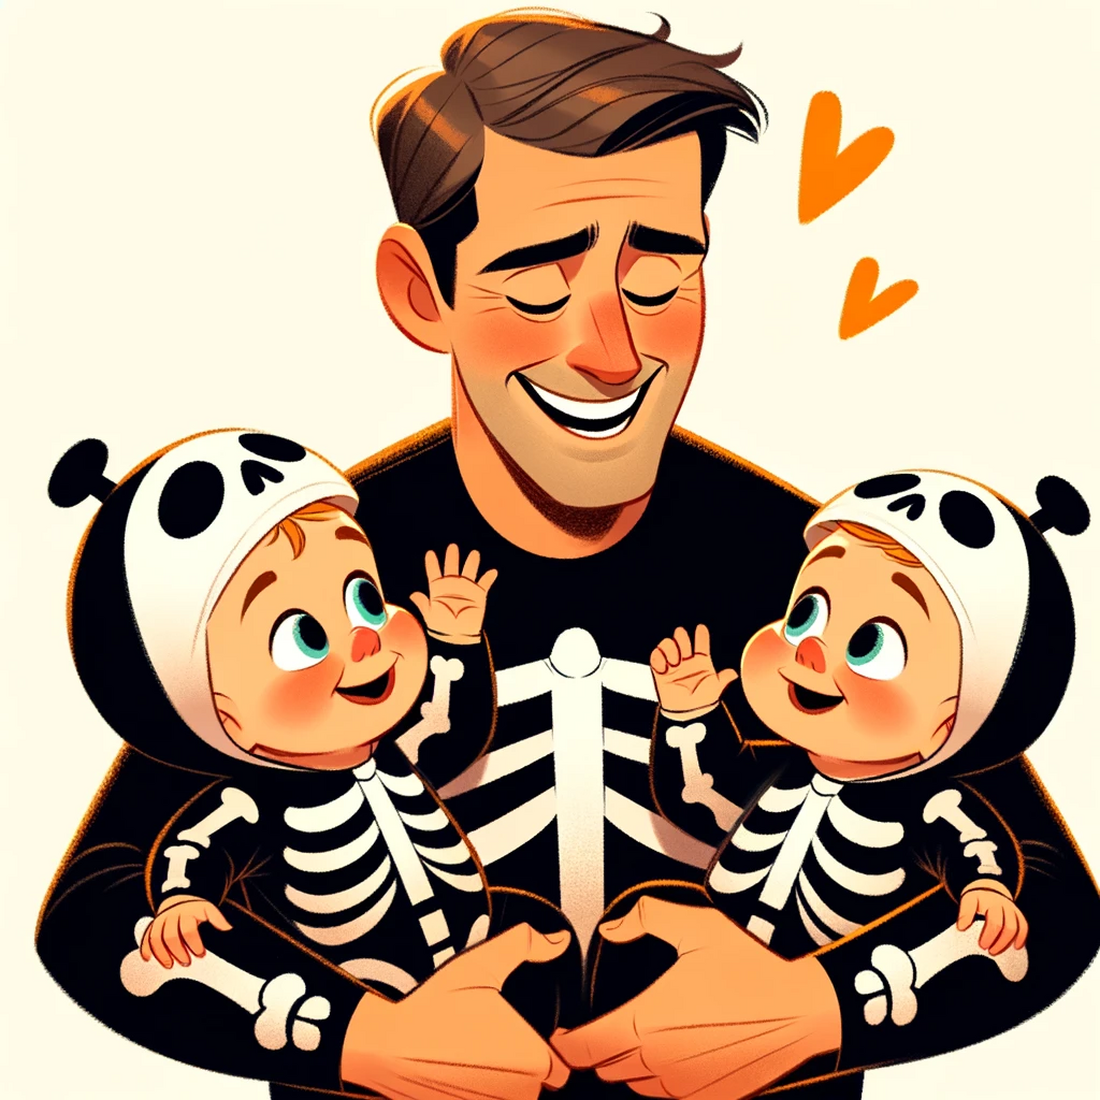 AI art of a man holding two babies with skeleton t-shirts, in a cartoon style